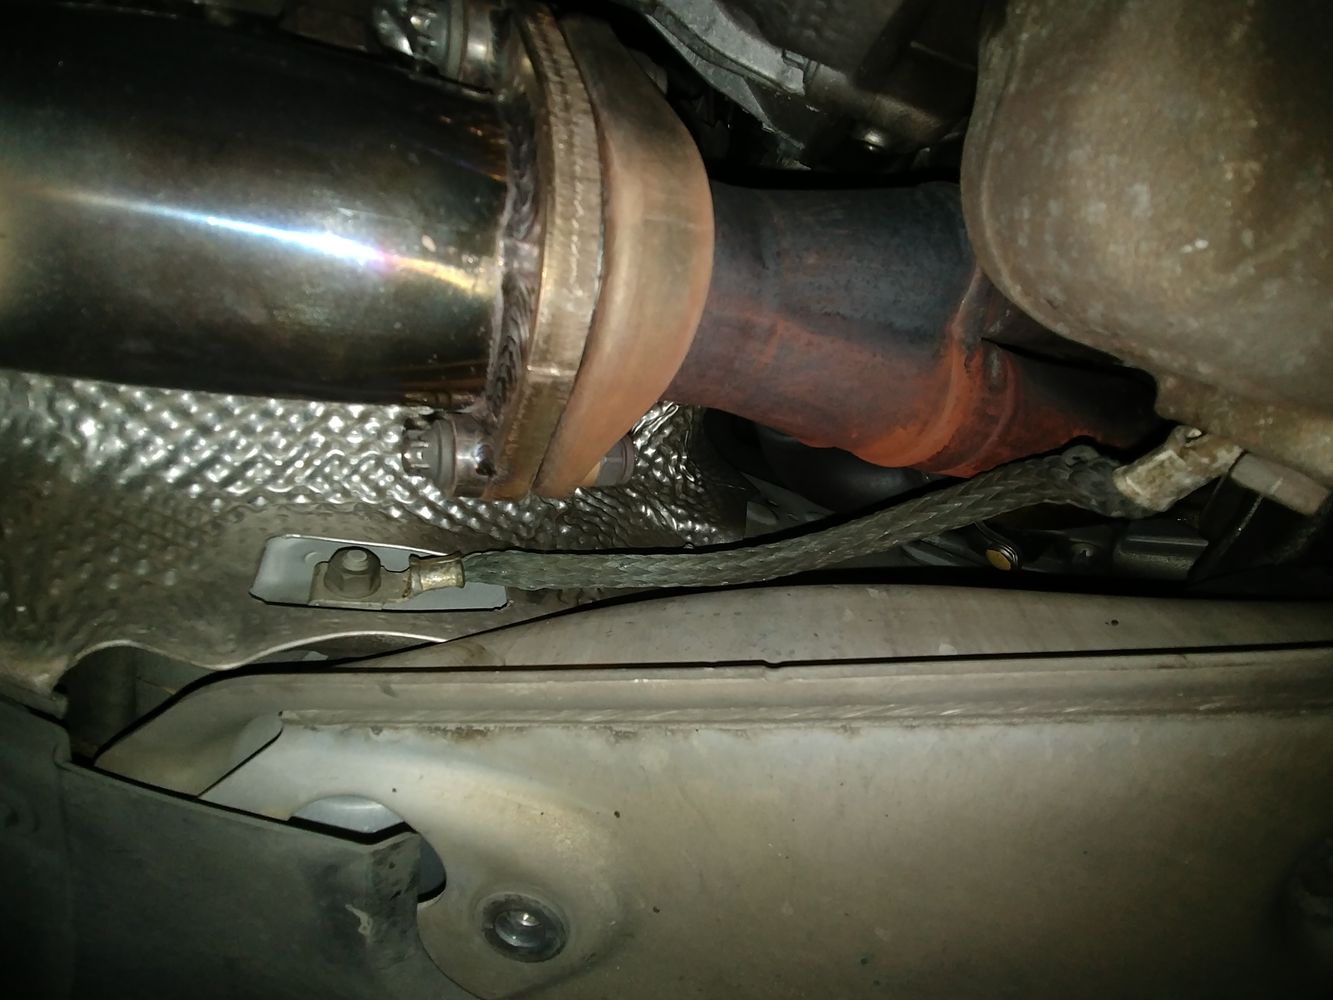 2003 bmw x5 3.0 starter replacement